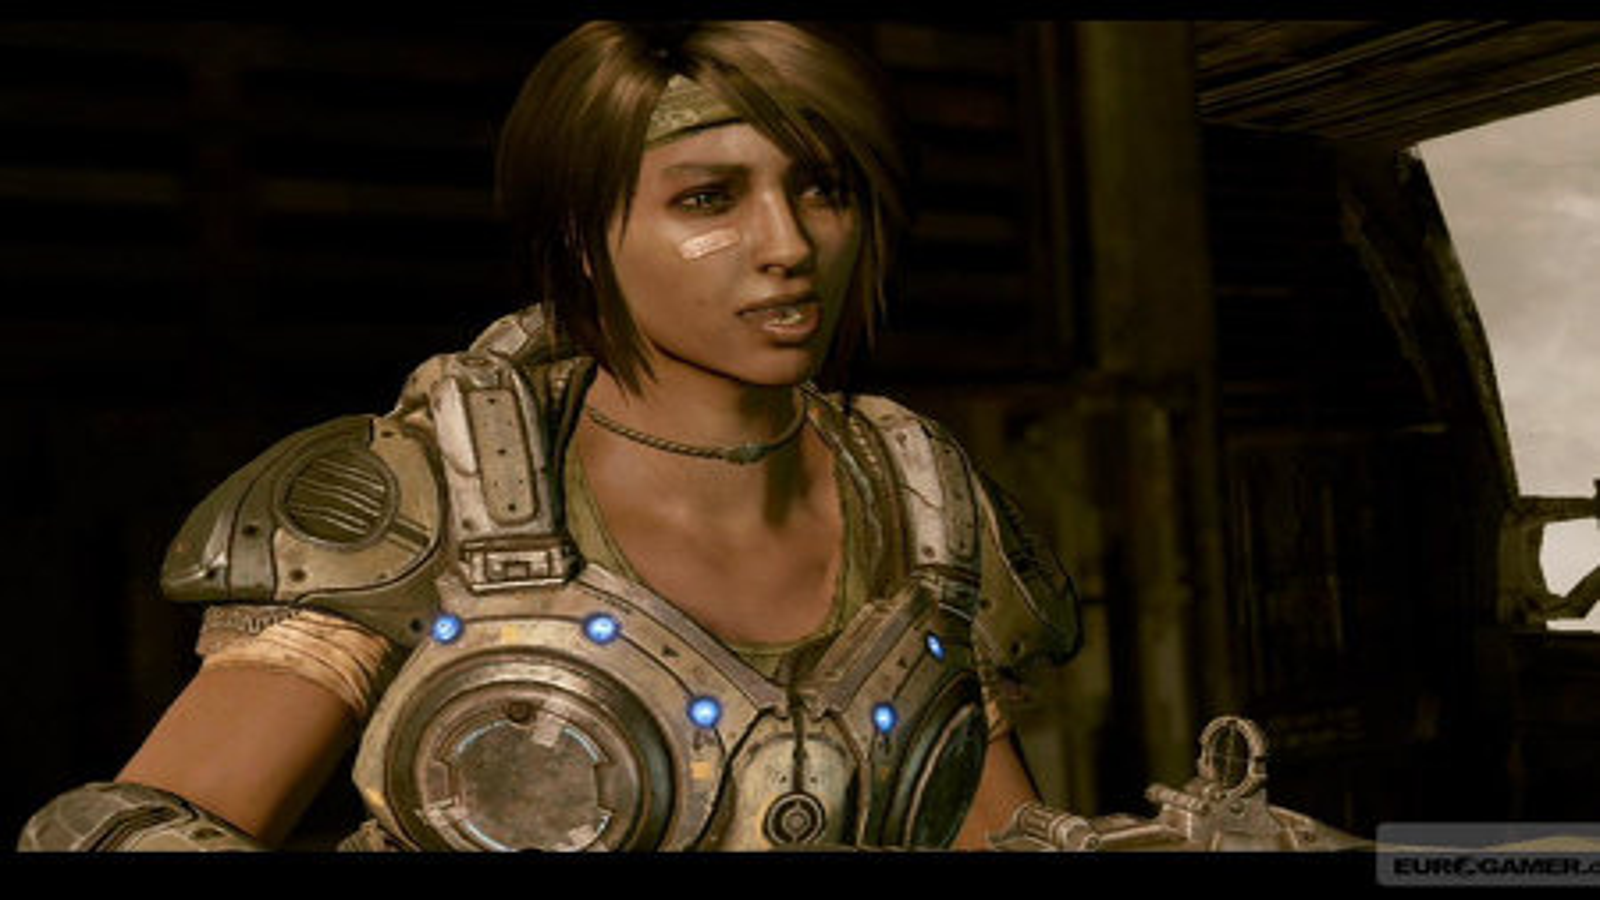 Gears of War 3 - Review - The New York Times